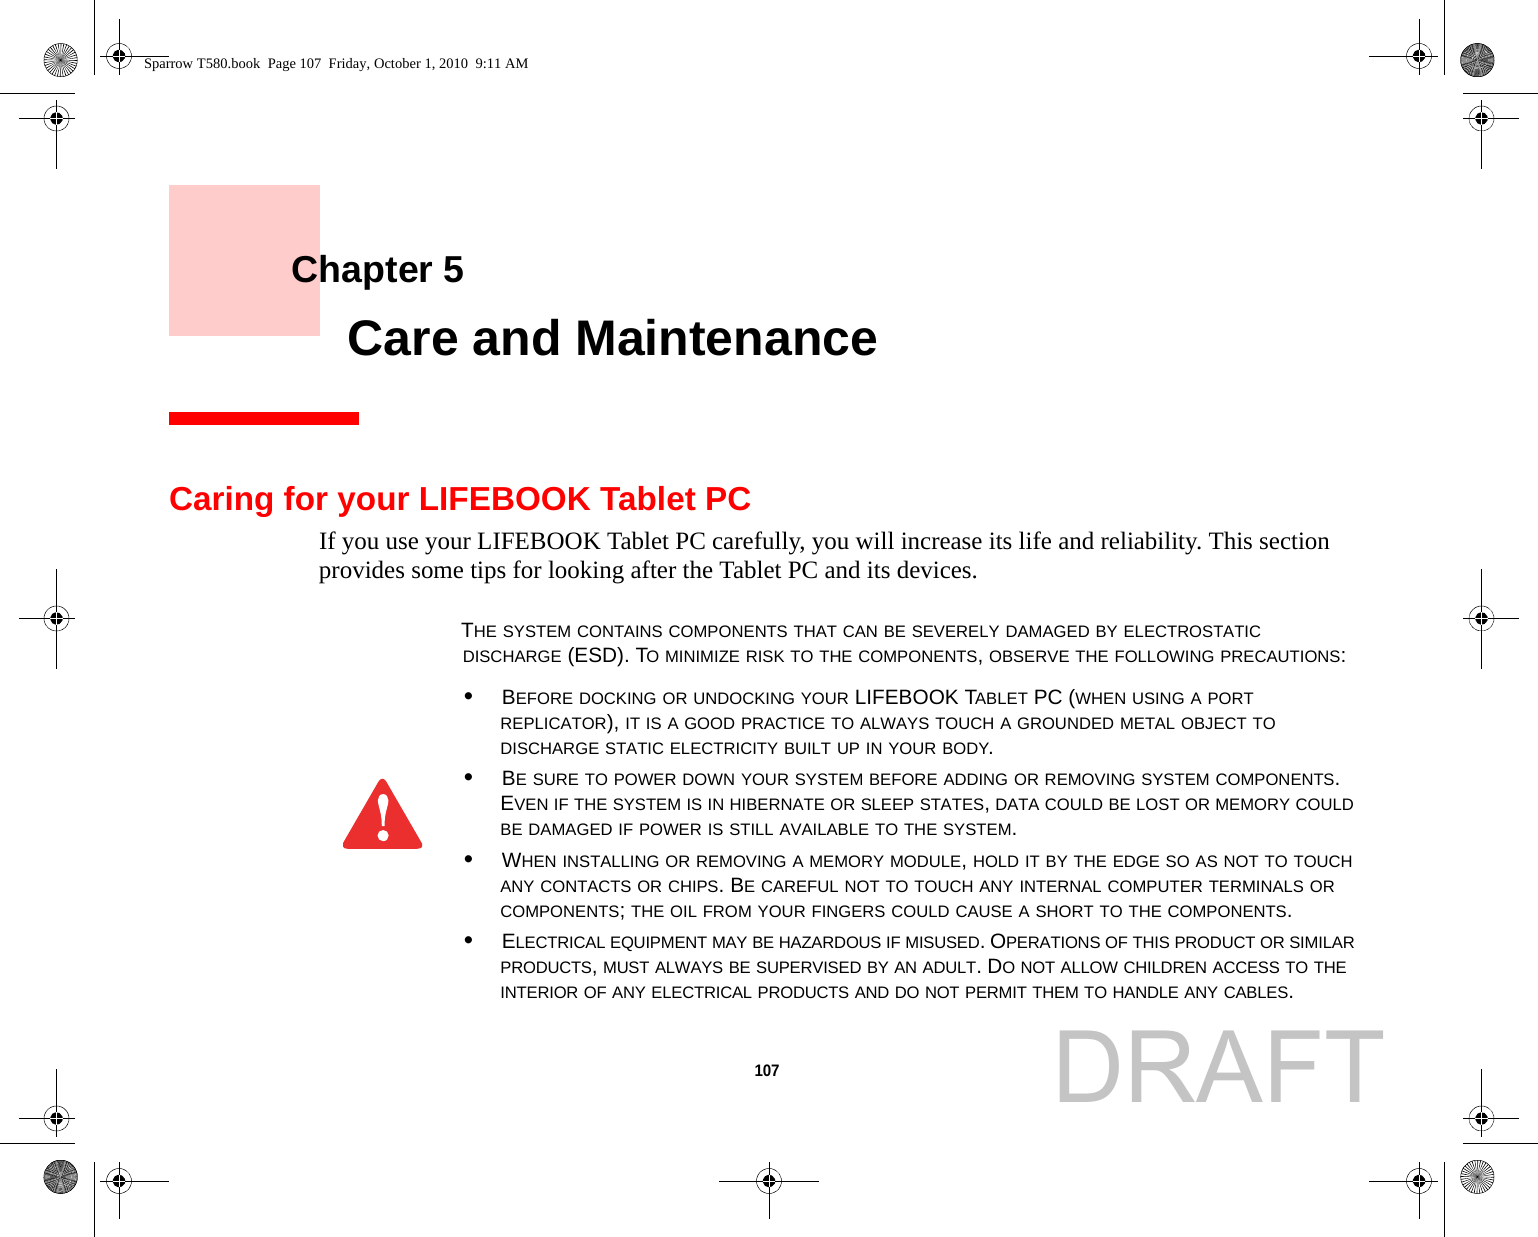 107     Chapter 5    Care and MaintenanceCaring for your LIFEBOOK Tablet PCIf you use your LIFEBOOK Tablet PC carefully, you will increase its life and reliability. This section provides some tips for looking after the Tablet PC and its devices.THE SYSTEM CONTAINS COMPONENTS THAT CAN BE SEVERELY DAMAGED BY ELECTROSTATIC DISCHARGE (ESD). TO MINIMIZE RISK TO THE COMPONENTS, OBSERVE THE FOLLOWING PRECAUTIONS:•BEFORE DOCKING OR UNDOCKING YOUR LIFEBOOK TABLET PC (WHEN USING A PORT REPLICATOR), IT IS A GOOD PRACTICE TO ALWAYS TOUCH A GROUNDED METAL OBJECT TO DISCHARGE STATIC ELECTRICITY BUILT UP IN YOUR BODY. •BE SURE TO POWER DOWN YOUR SYSTEM BEFORE ADDING OR REMOVING SYSTEM COMPONENTS. EVEN IF THE SYSTEM IS IN HIBERNATE OR SLEEP STATES, DATA COULD BE LOST OR MEMORY COULD BE DAMAGED IF POWER IS STILL AVAILABLE TO THE SYSTEM.•WHEN INSTALLING OR REMOVING A MEMORY MODULE, HOLD IT BY THE EDGE SO AS NOT TO TOUCH ANY CONTACTS OR CHIPS. BE CAREFUL NOT TO TOUCH ANY INTERNAL COMPUTER TERMINALS OR COMPONENTS; THE OIL FROM YOUR FINGERS COULD CAUSE A SHORT TO THE COMPONENTS. •ELECTRICAL EQUIPMENT MAY BE HAZARDOUS IF MISUSED. OPERATIONS OF THIS PRODUCT OR SIMILAR PRODUCTS, MUST ALWAYS BE SUPERVISED BY AN ADULT. DO NOT ALLOW CHILDREN ACCESS TO THE INTERIOR OF ANY ELECTRICAL PRODUCTS AND DO NOT PERMIT THEM TO HANDLE ANY CABLES.Sparrow T580.book  Page 107  Friday, October 1, 2010  9:11 AMDRAFT